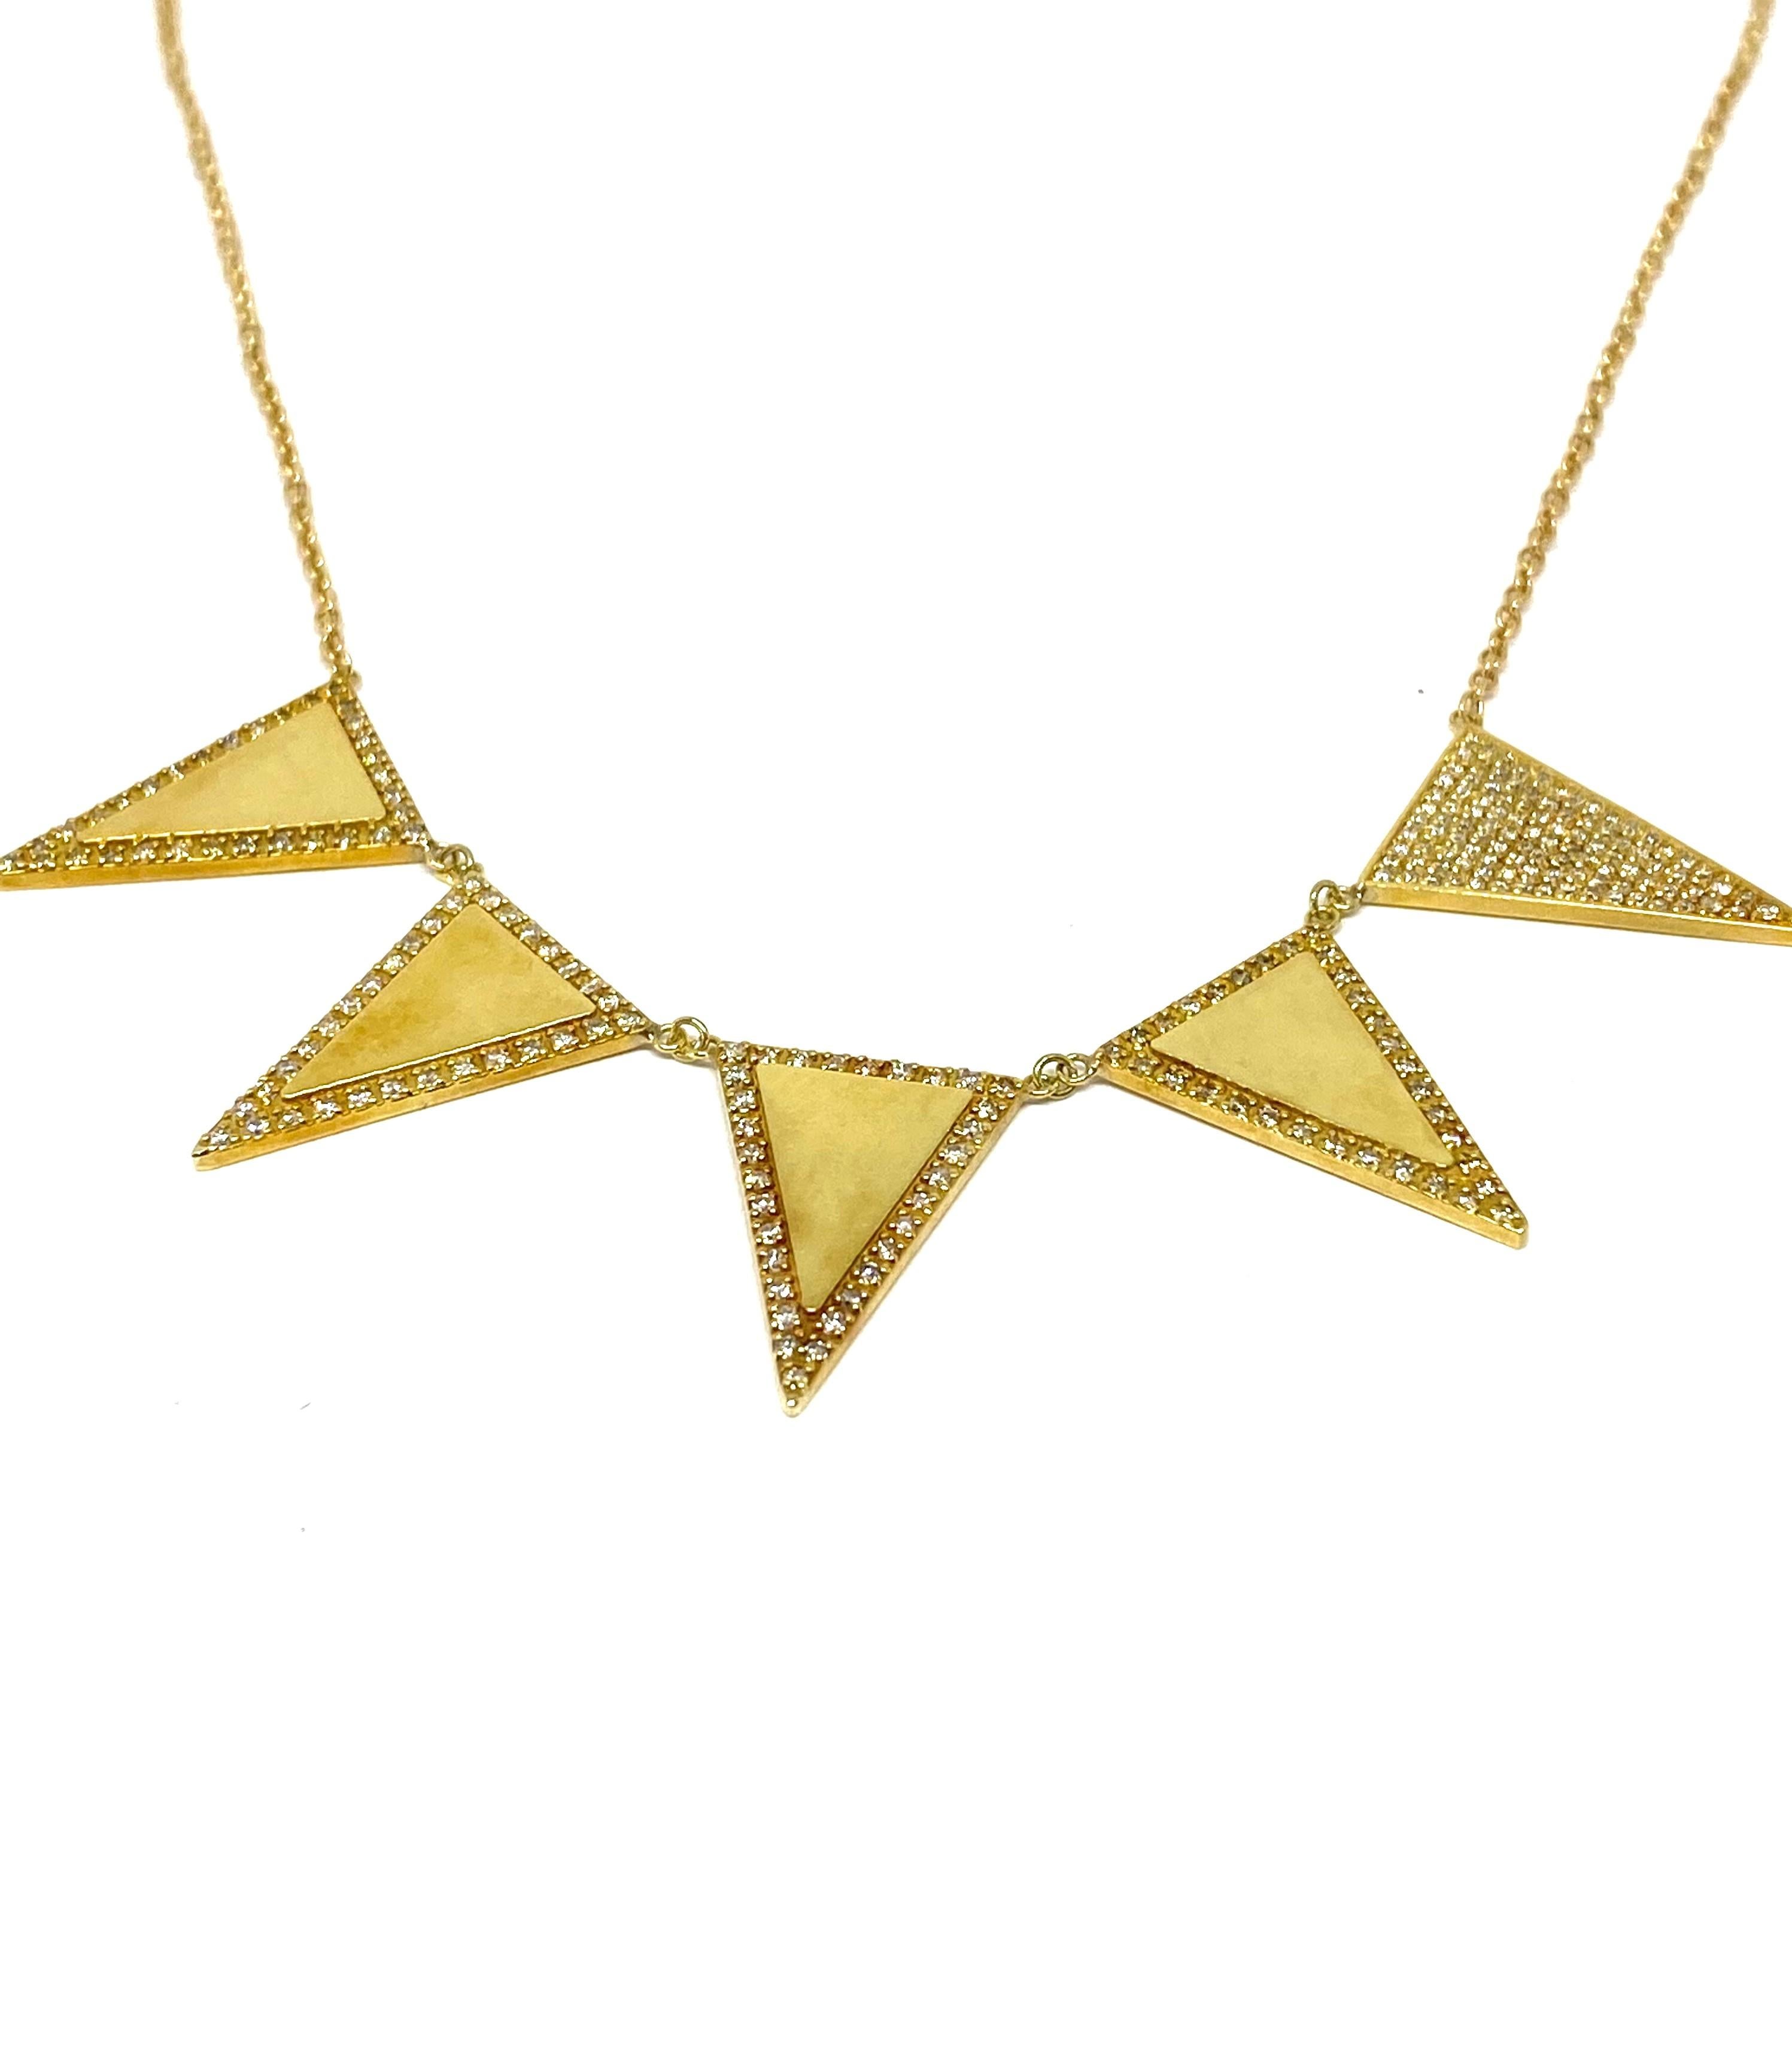 Jennifer Meyer 18K Yellow Gold and Diamond Triangle Necklace 

Product details:
18K yellow gold and 1.5ct pave diamond chain necklace with five pyramid motif pendants
Each triangle measure 0.75